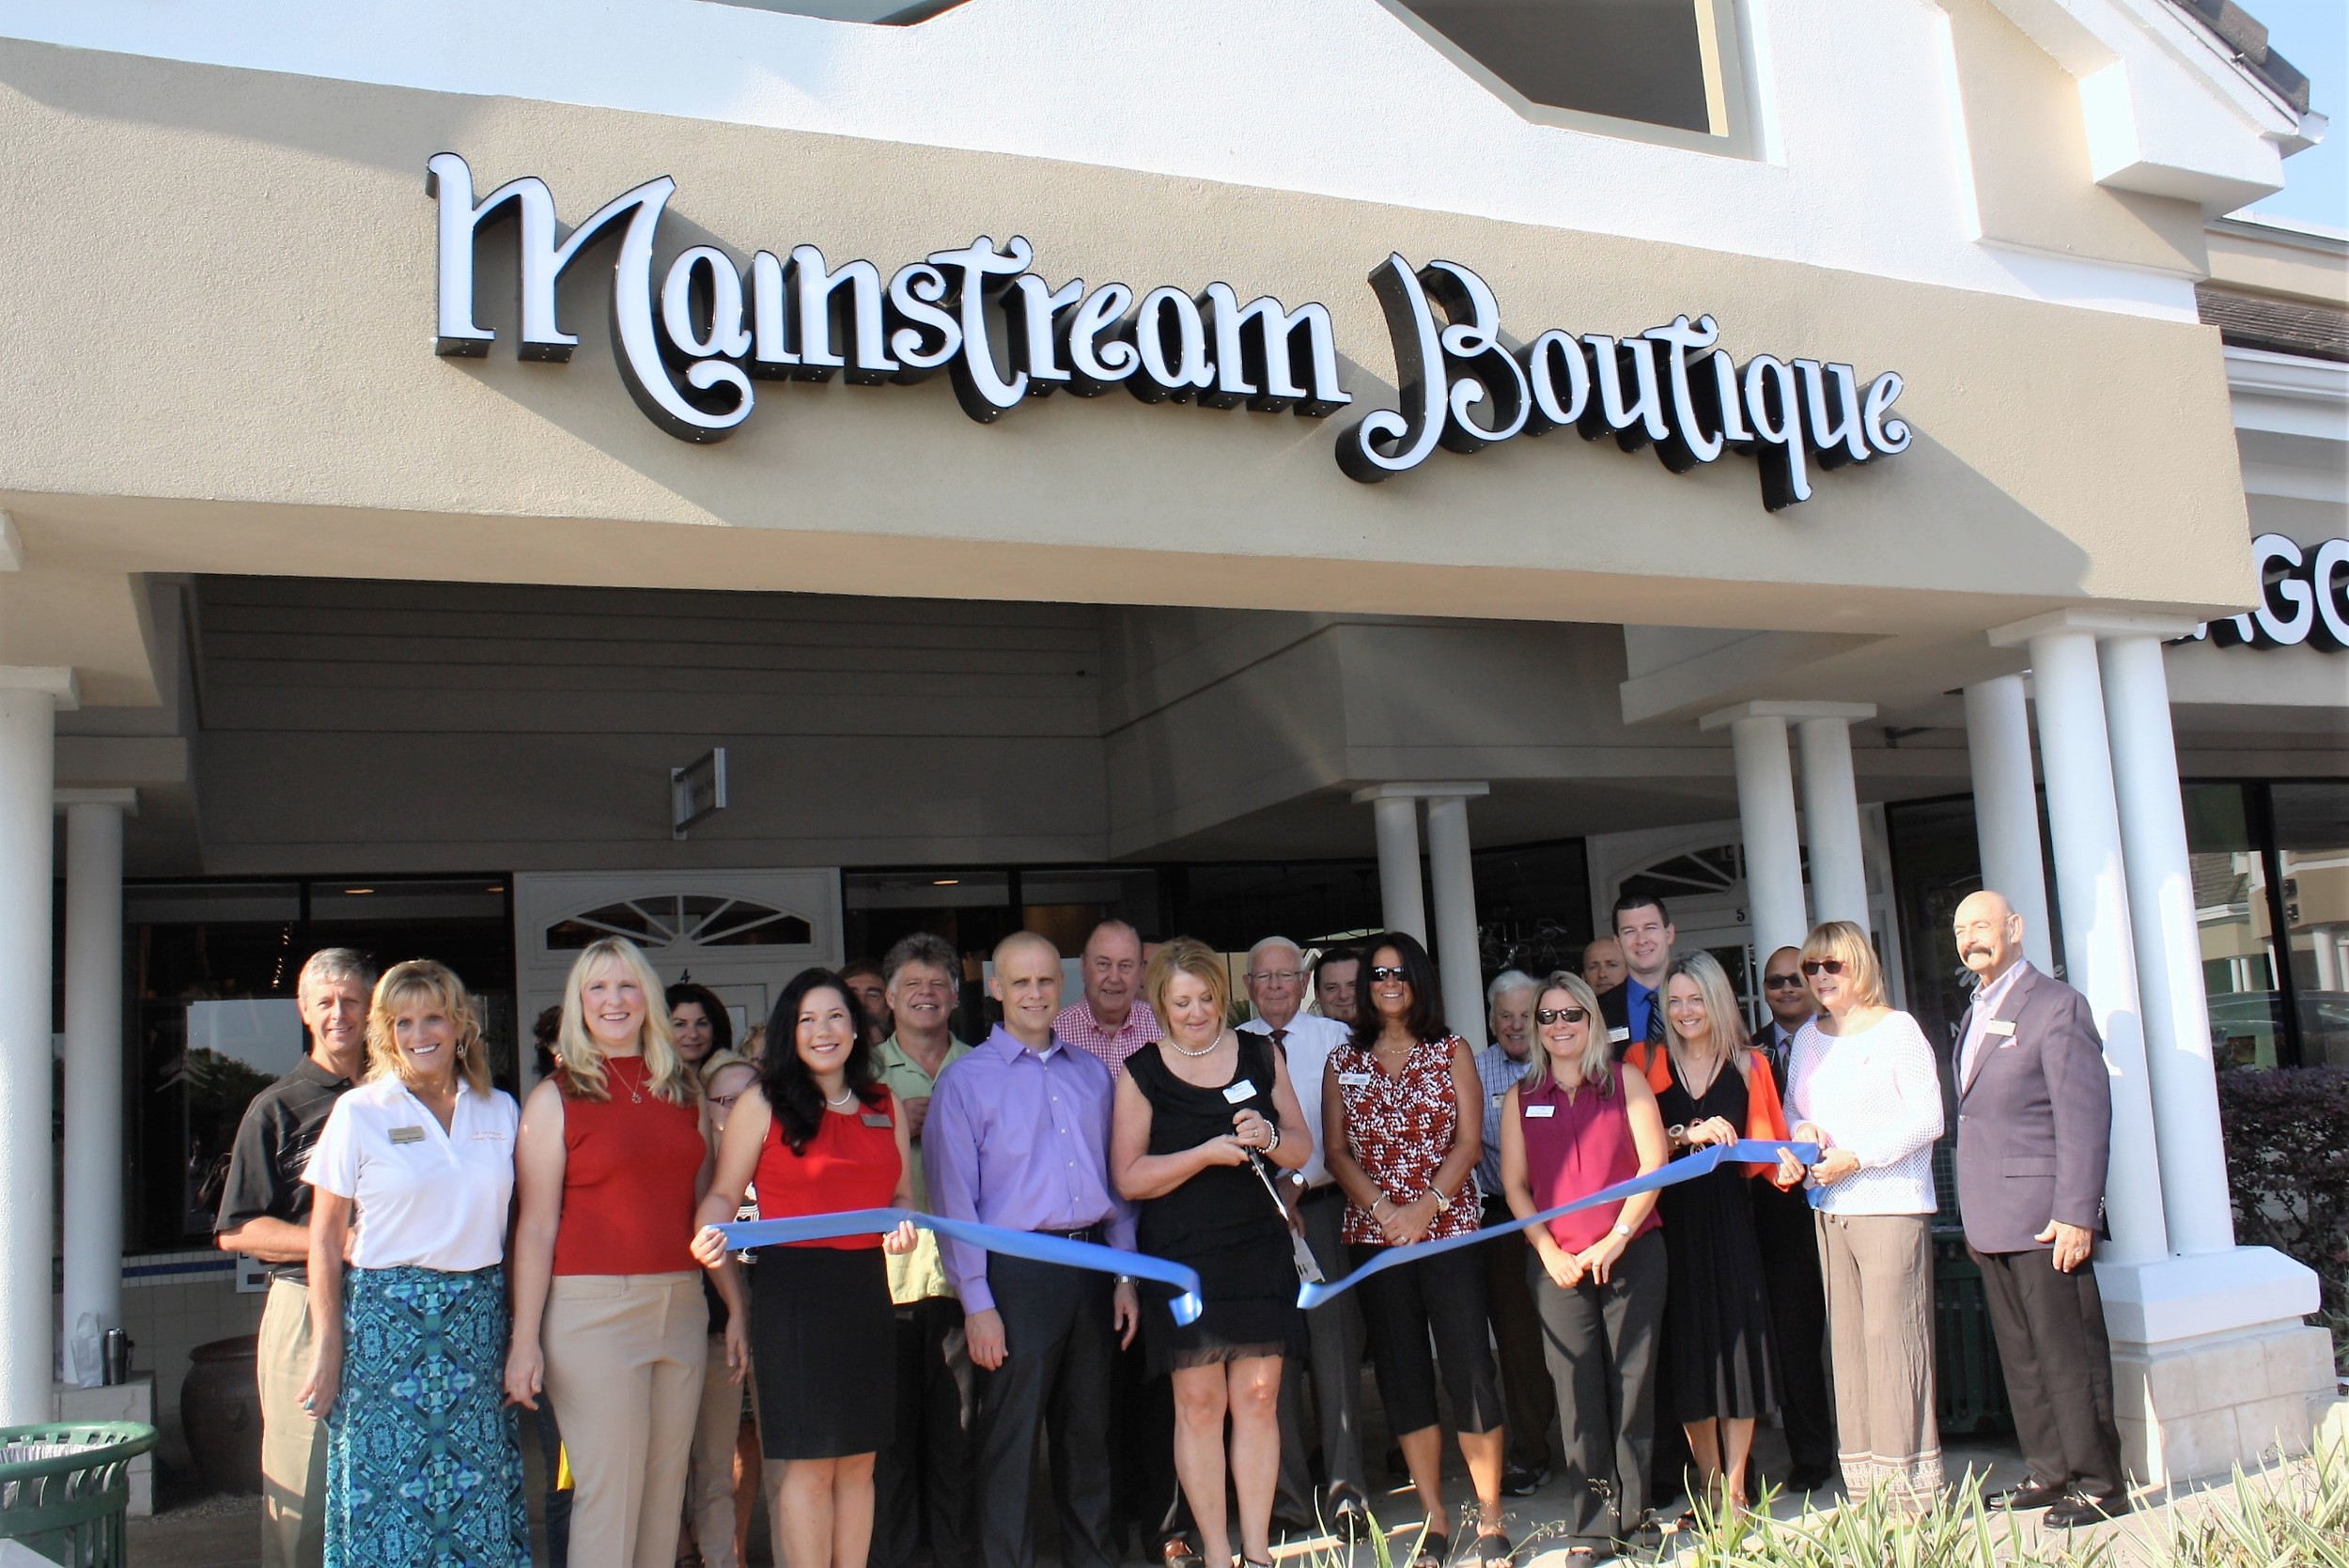 Mainstream Boutique owners Carla and Kurt Miles cut the ribbon on their new store, Mainstream Boutique May 31.